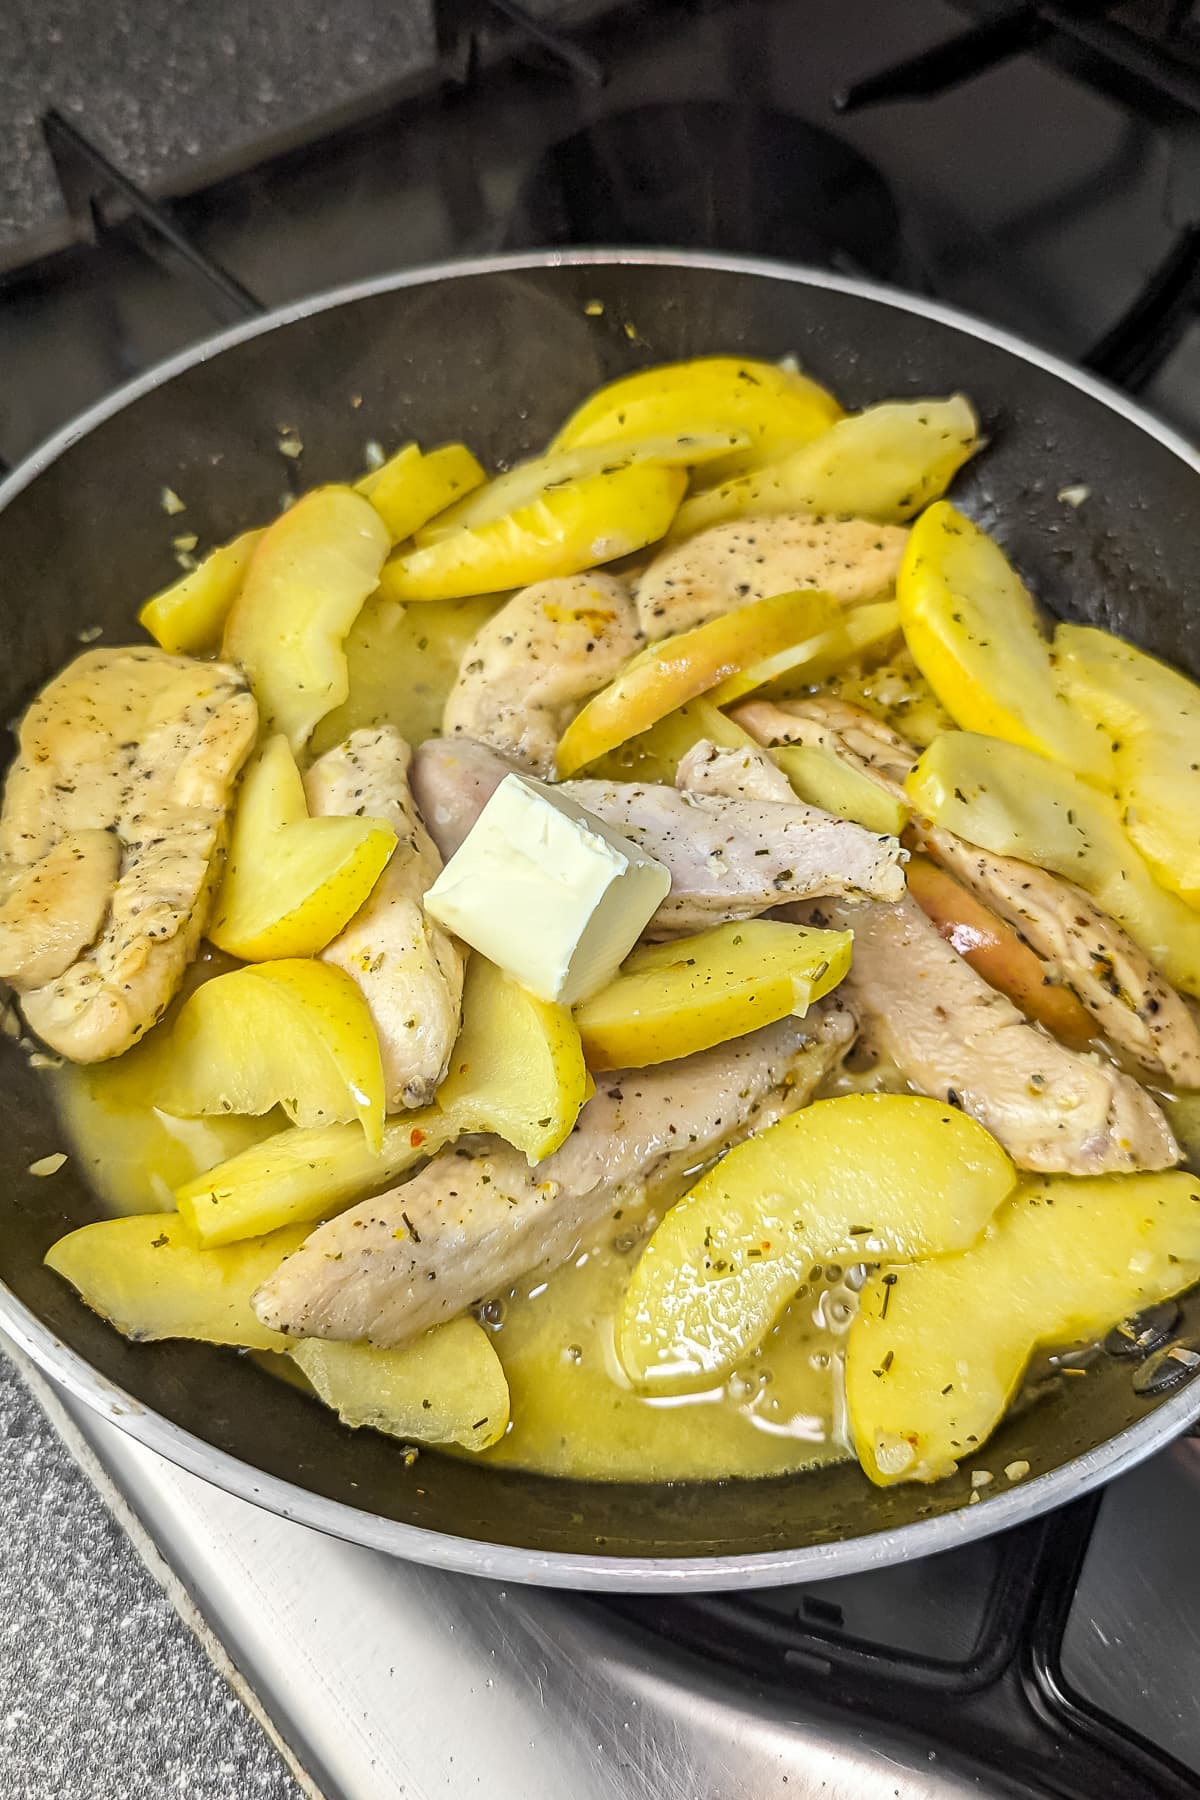 A pat of butter melting over the cooking chicken and apple slices in the skillet.